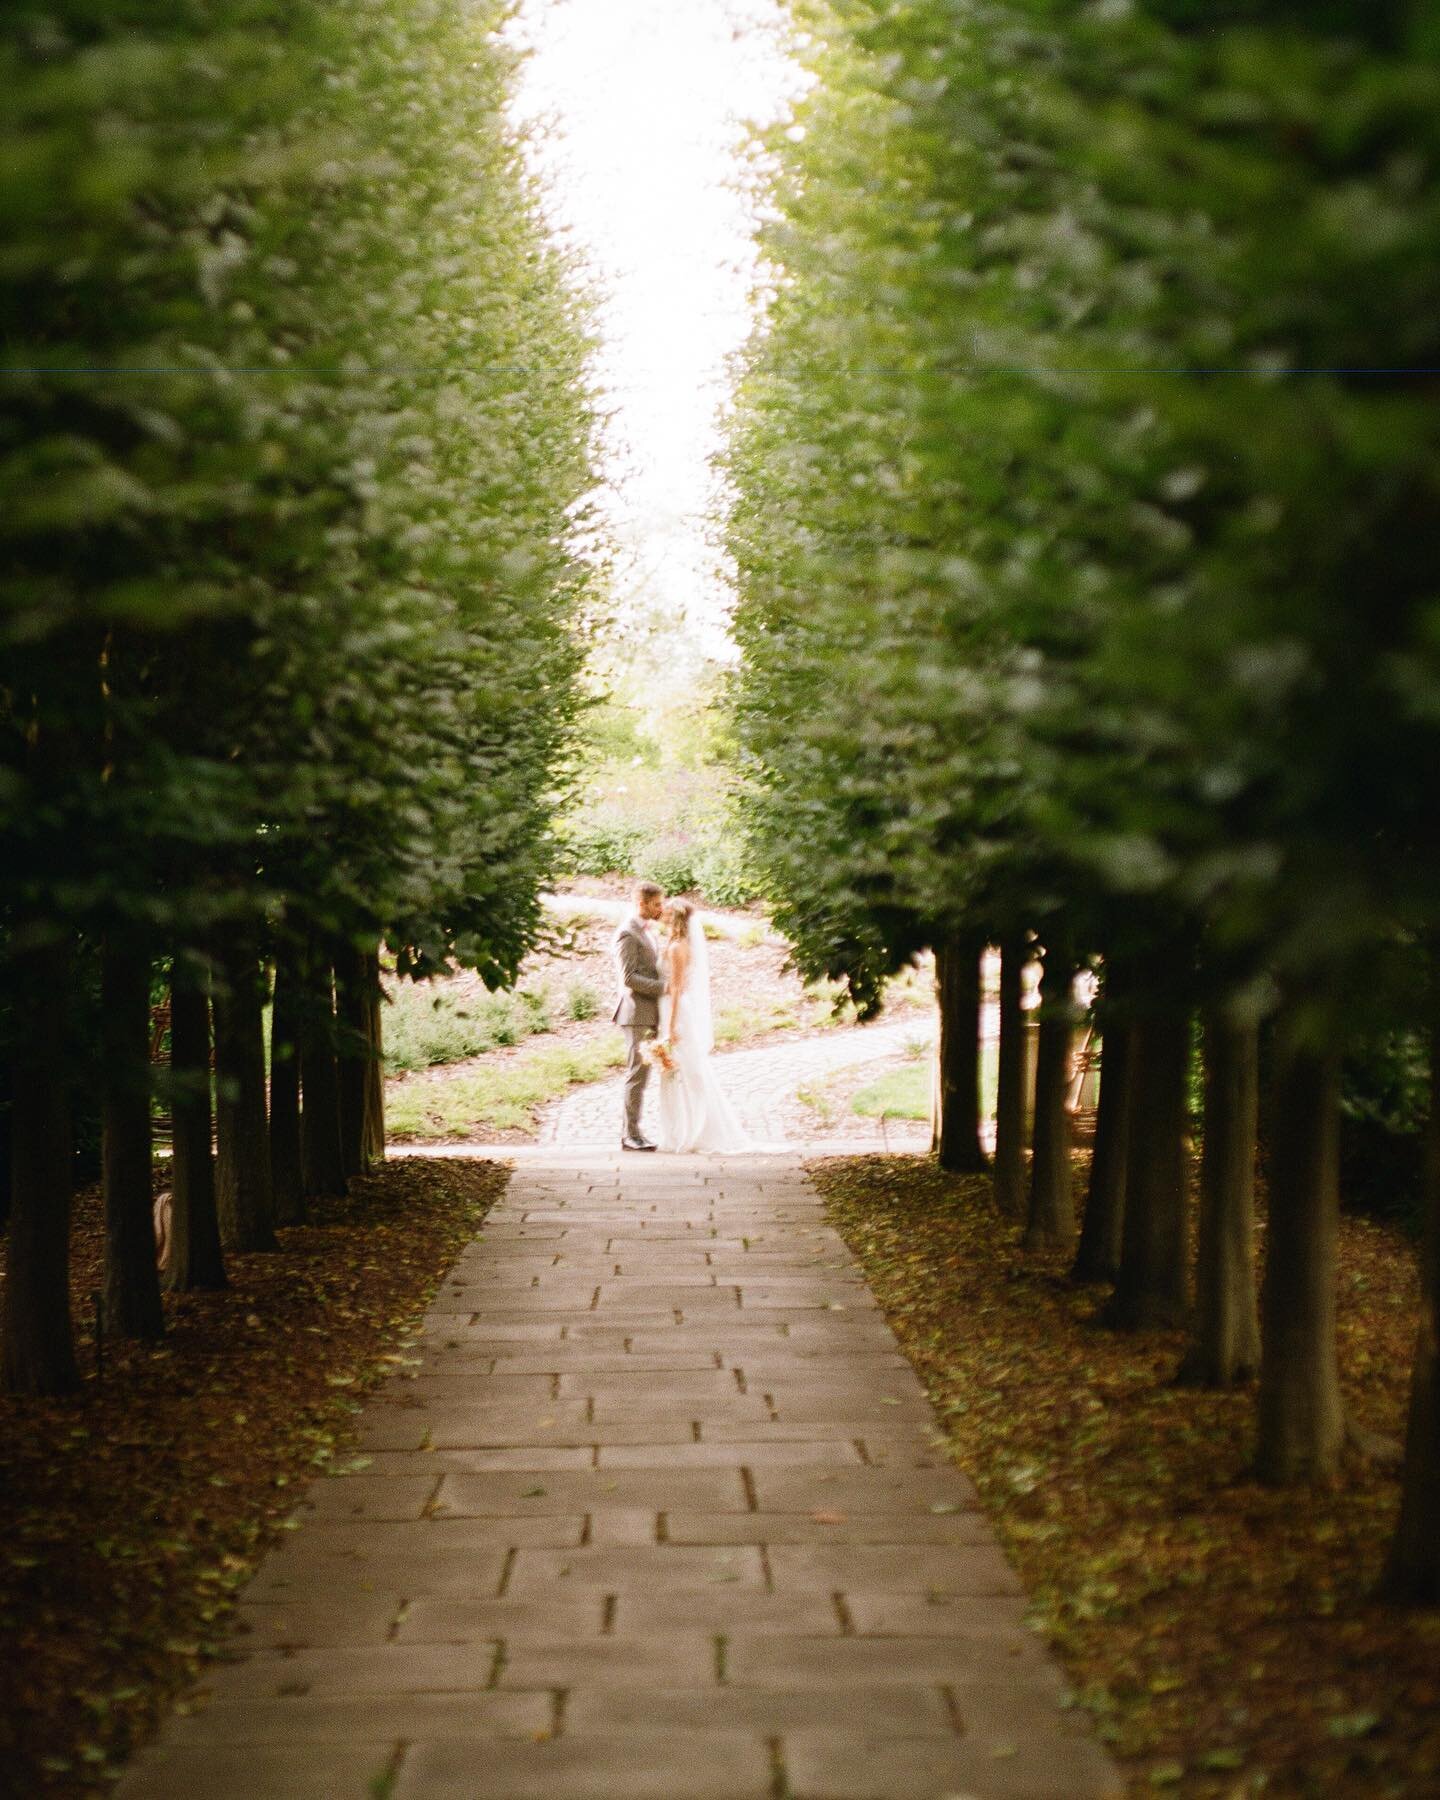 Have some more film goodness for your Saturday! An absolutely stunning day for @jacquelinecw3 &amp; Yannis&rsquo;s day at @kewgardens 

These are a mix of 120 &amp; 35mm still frames taken with the Pentax 67, Canon Sure Shot Max &amp; Voigtlander Bes